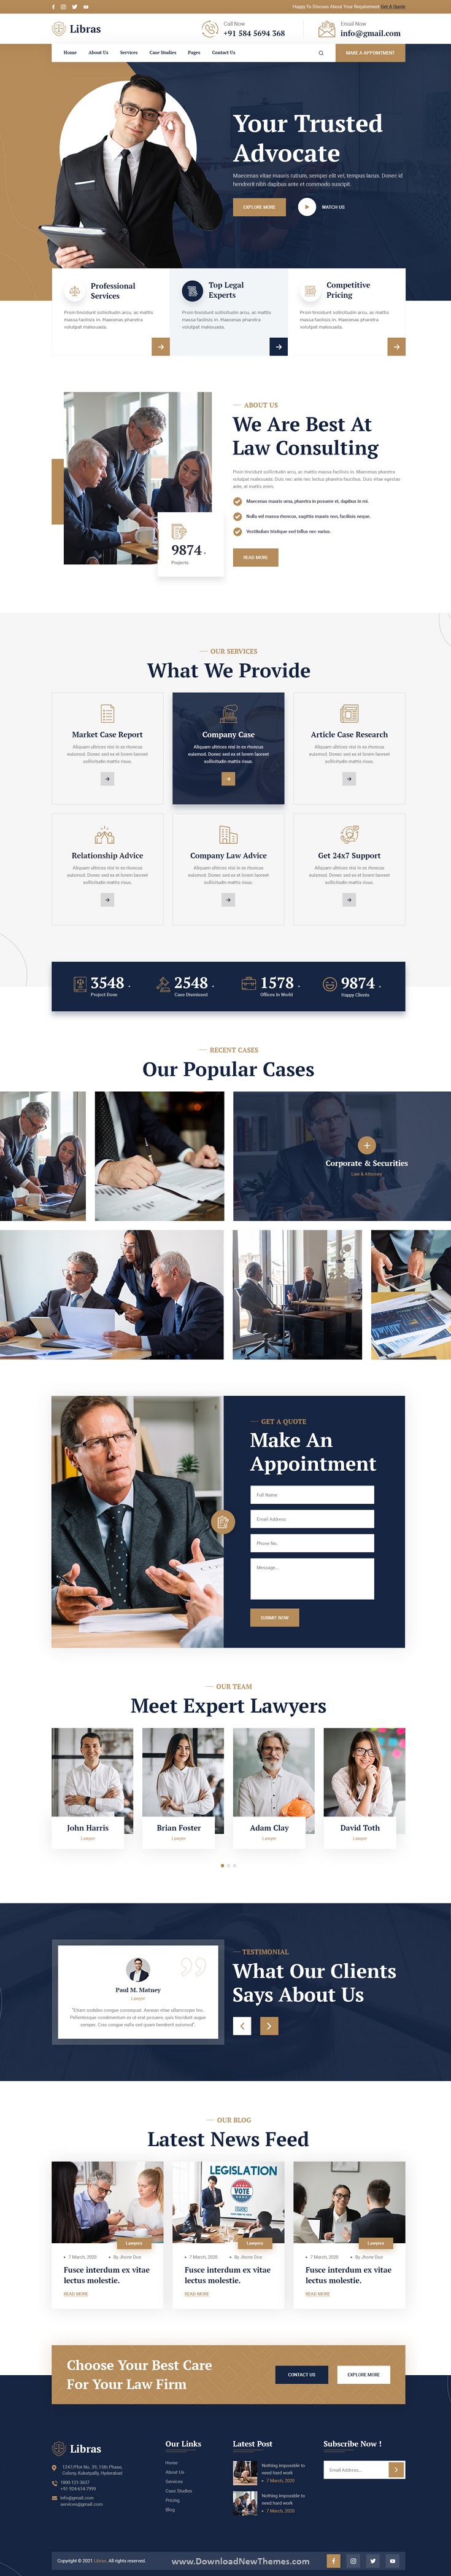 Libras - Attorney & Lawyers PSD Template